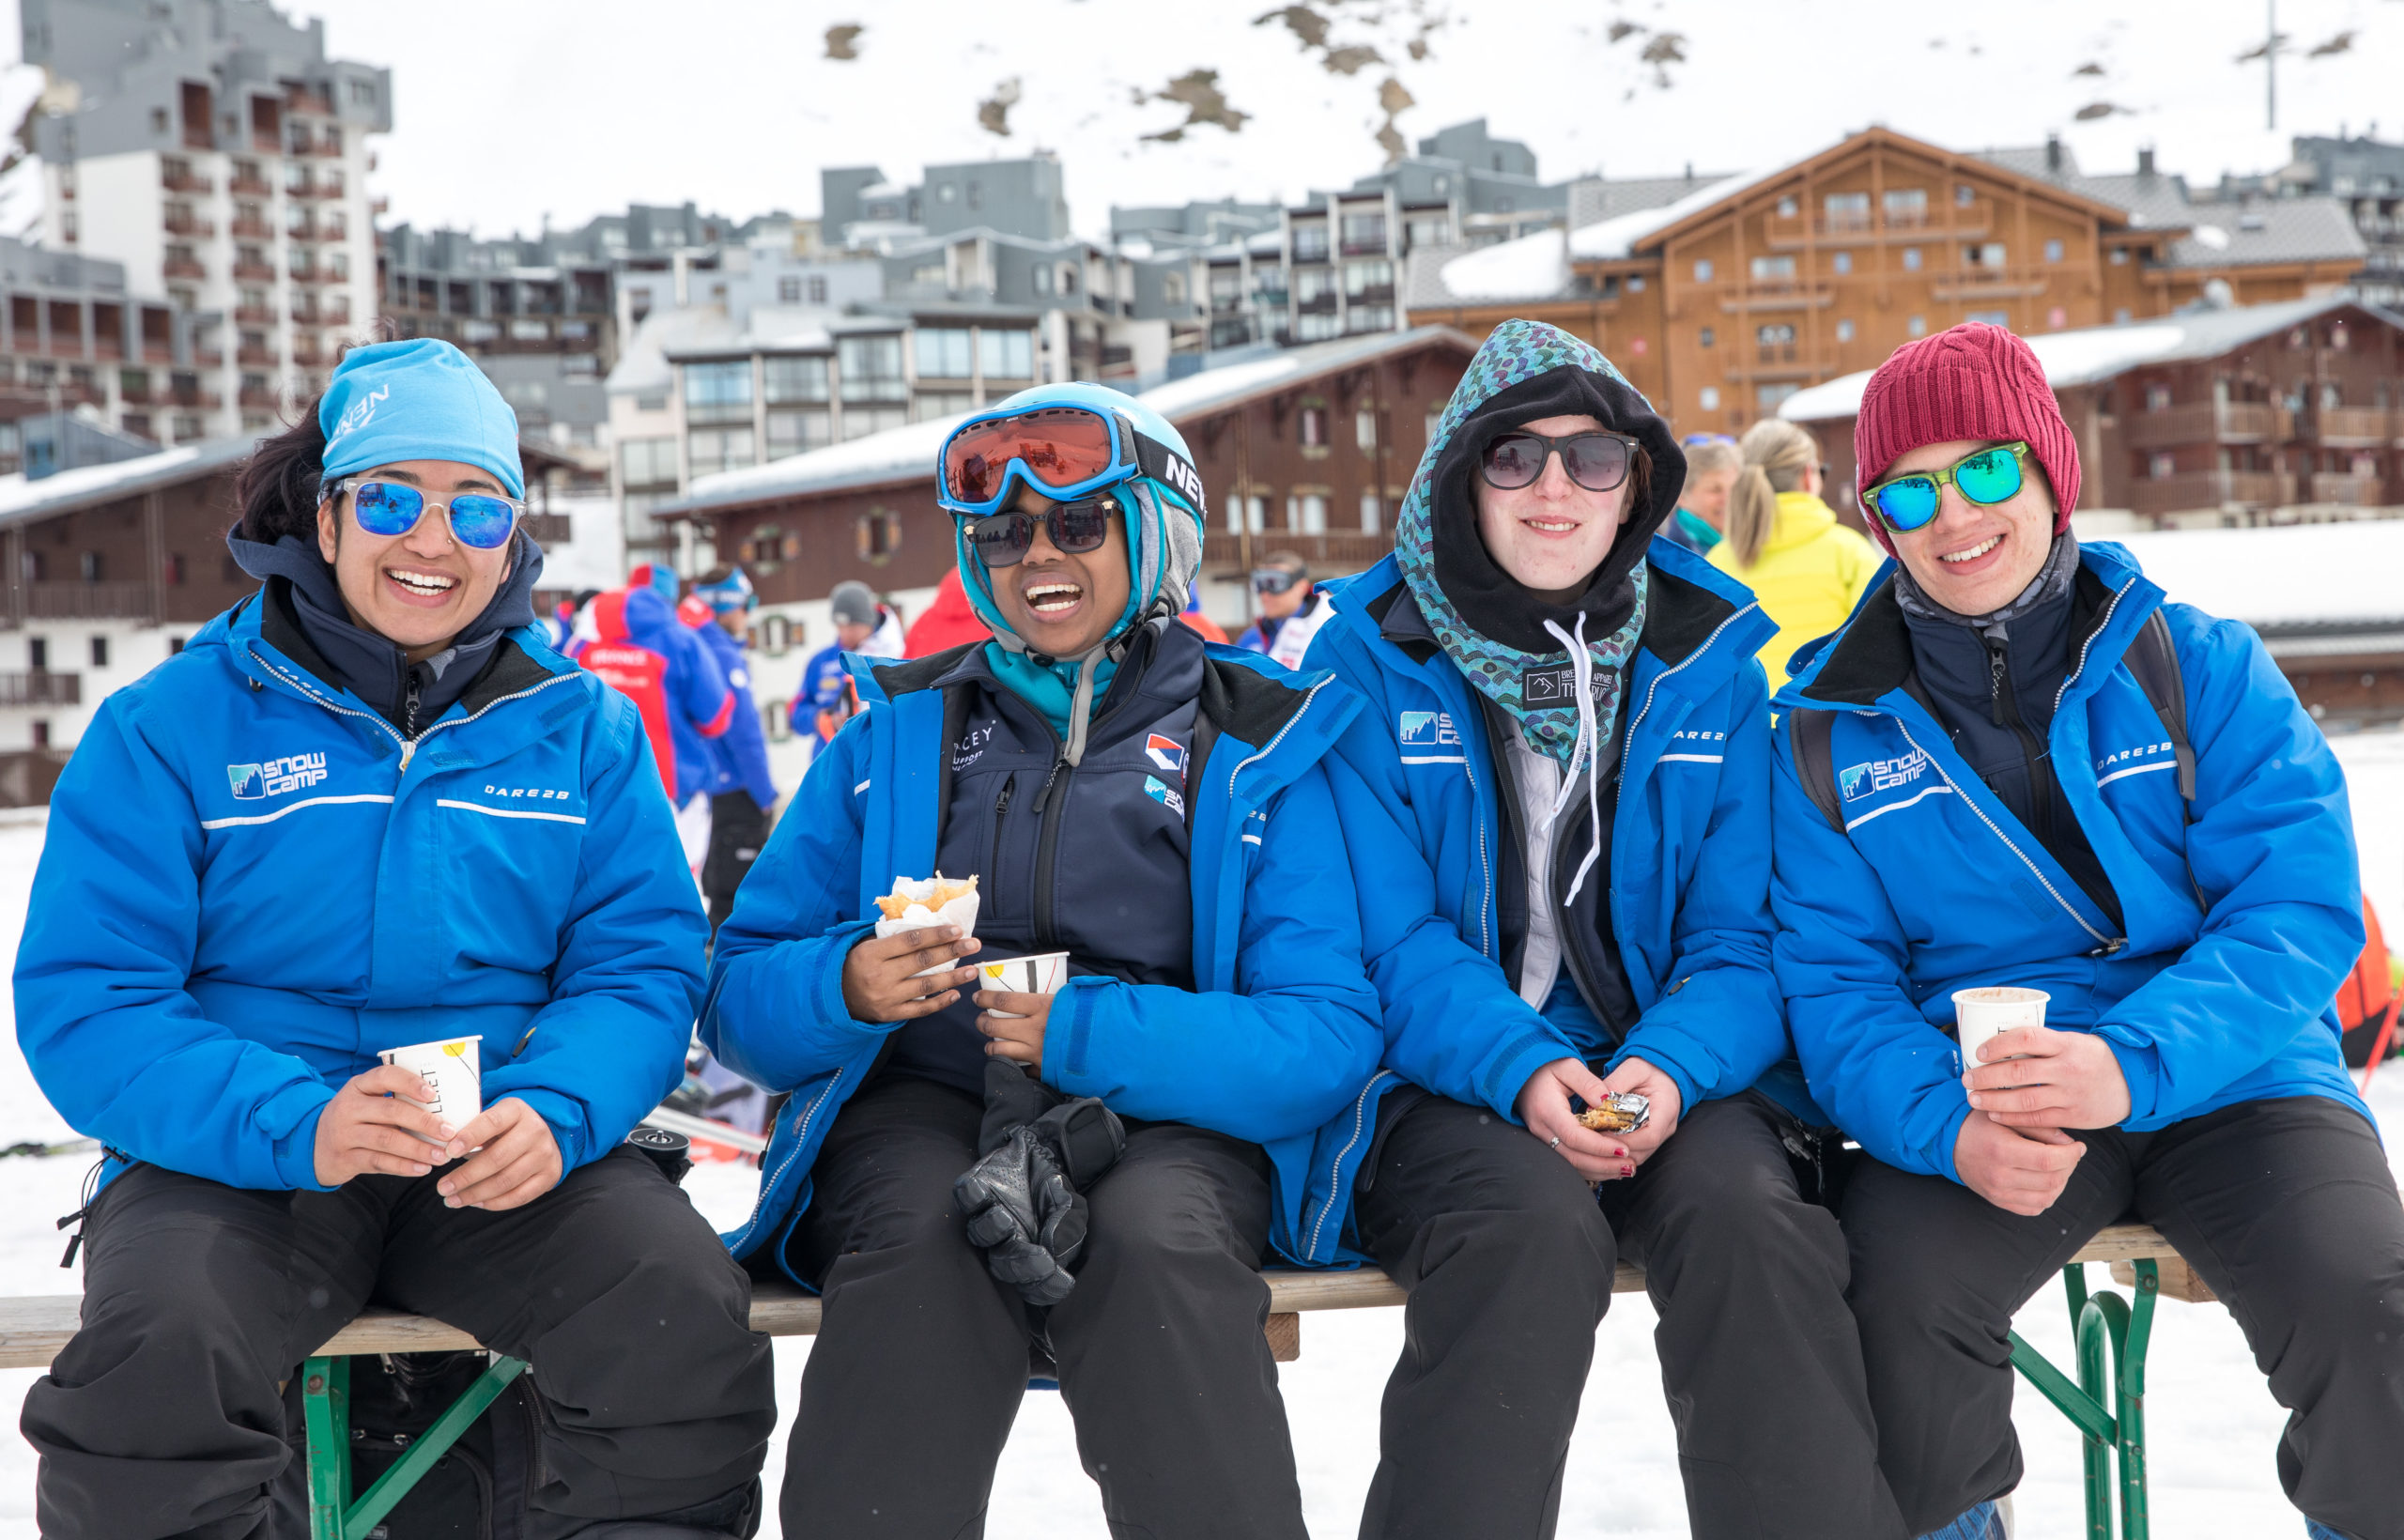 SNOW-CAMP: THE UK’S NATIONAL SNOWSPORTS YOUTH CHARITY